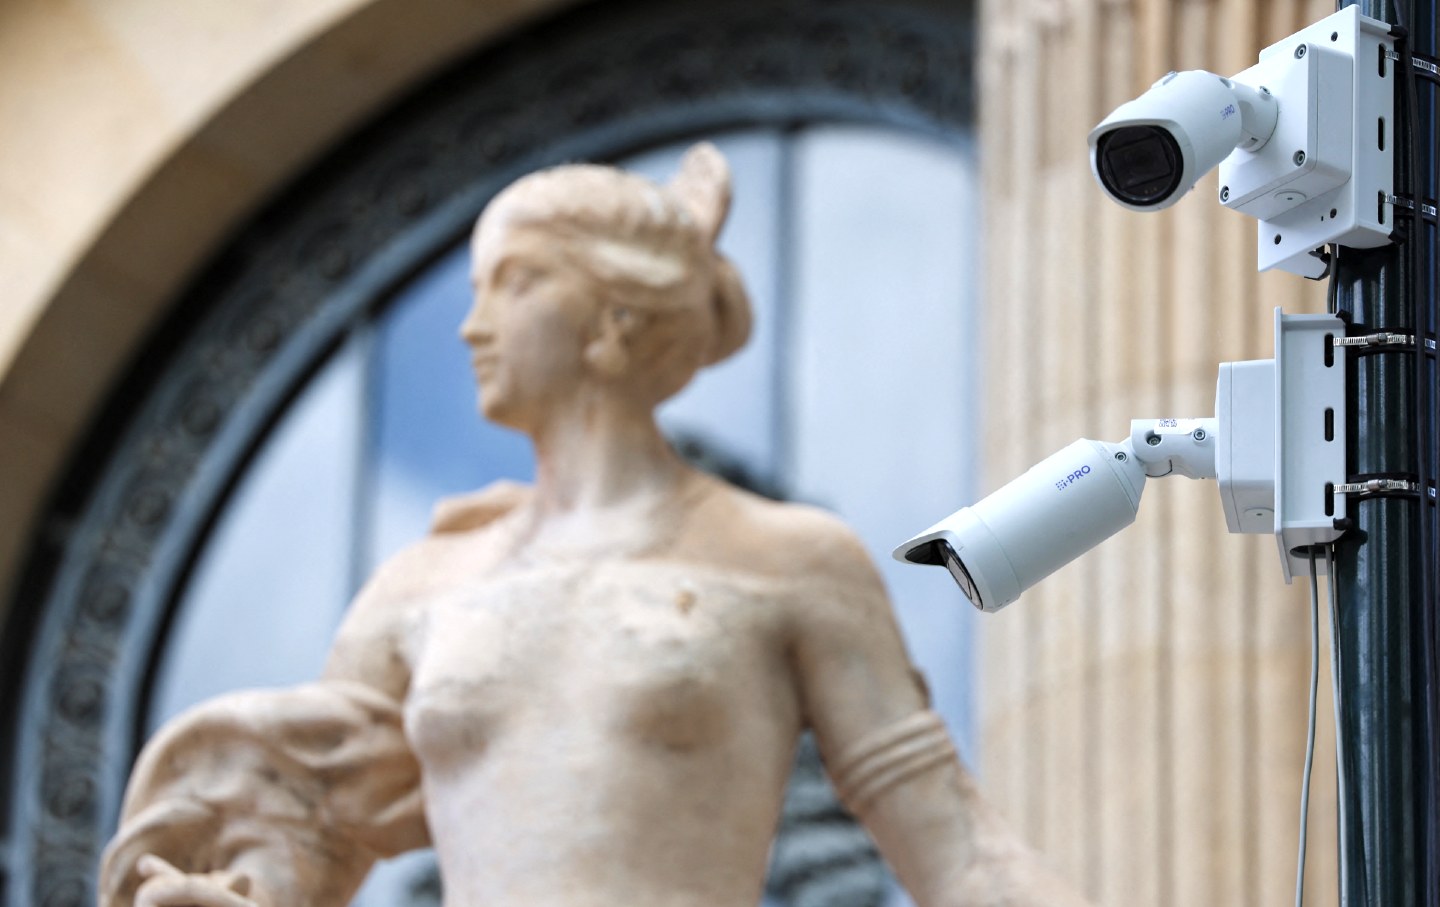 A CCTV surveillance camera watches the Olympic crowds with a statue of the Grand Palais Olympic site in the background in Paris on July 22, 2024.